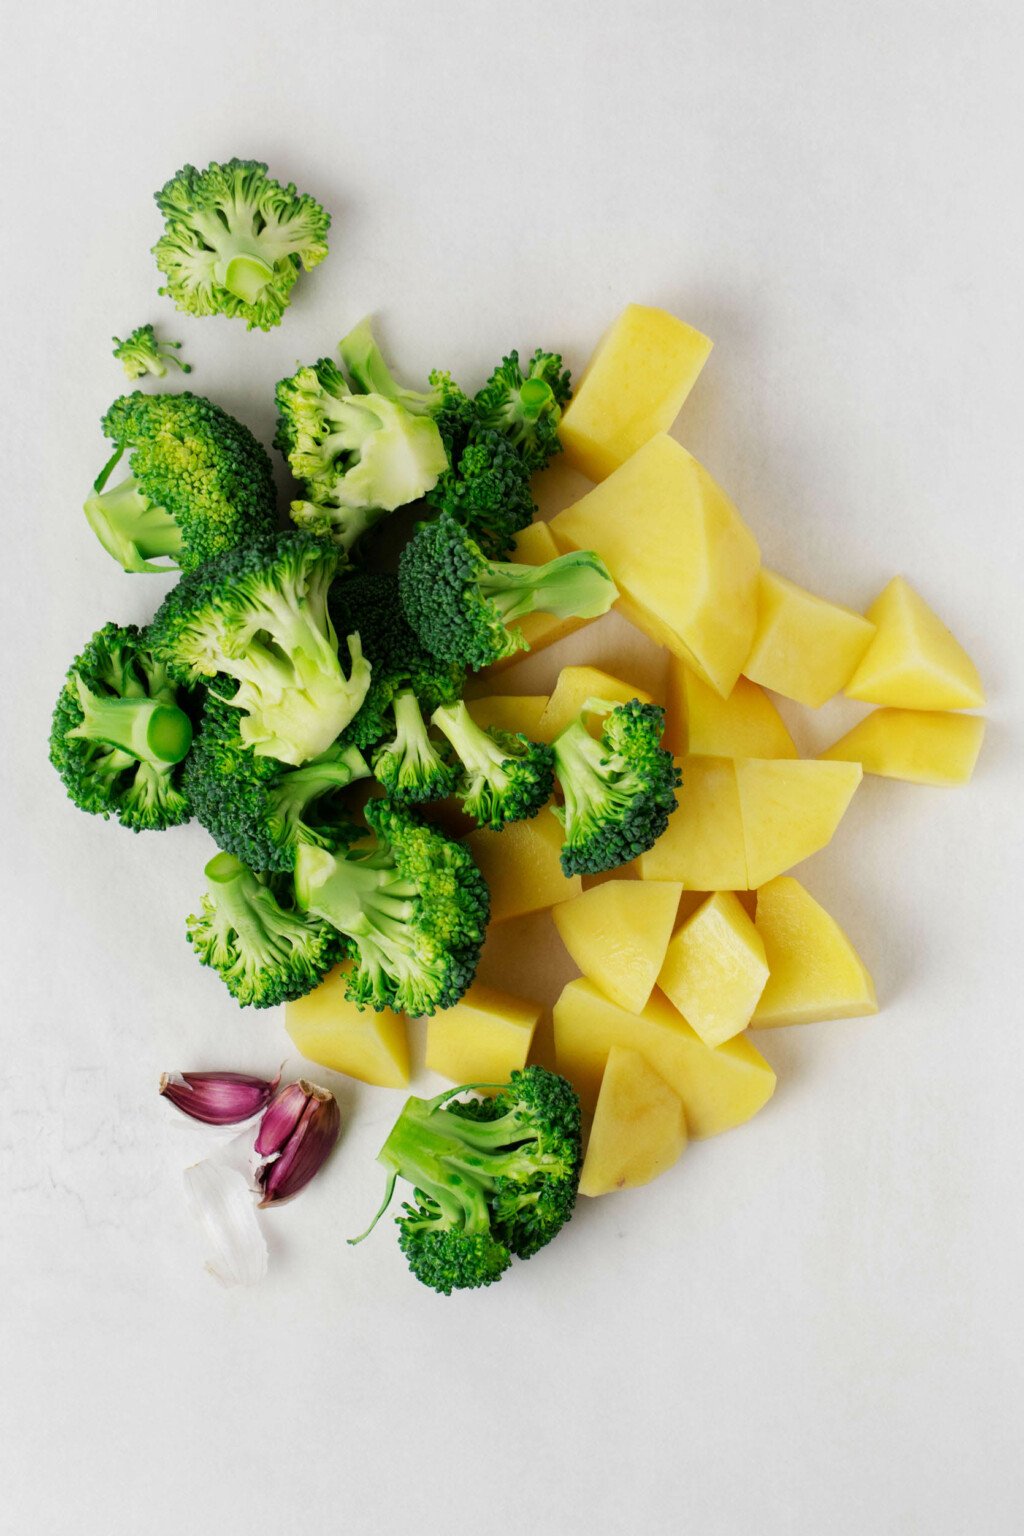 Potatoes, broccoli and garlic are laid out on a white surface.